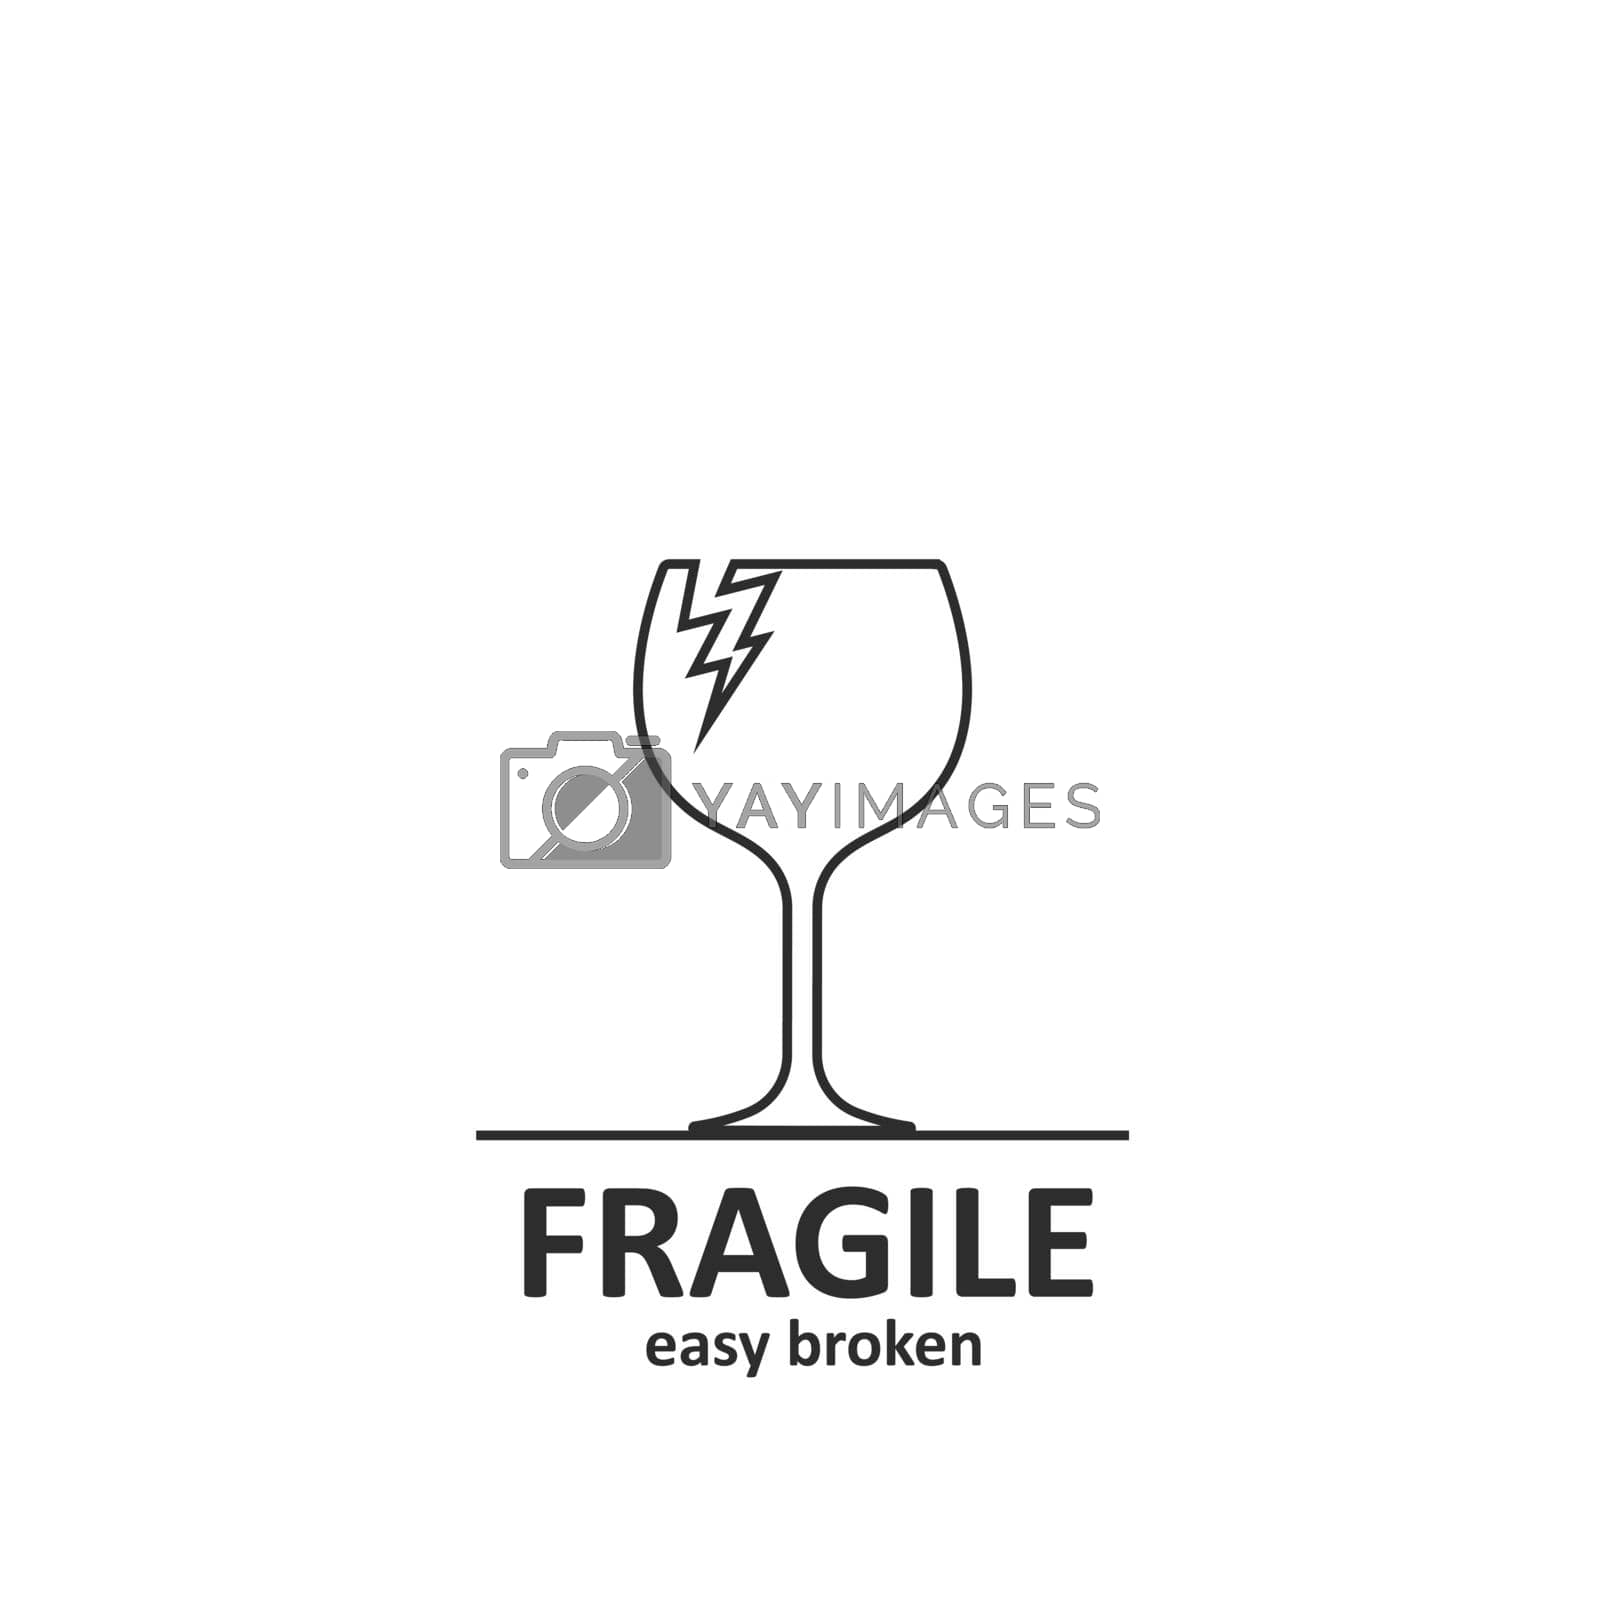 Royalty free image of fragile sign  icon vector illustration design template by idan